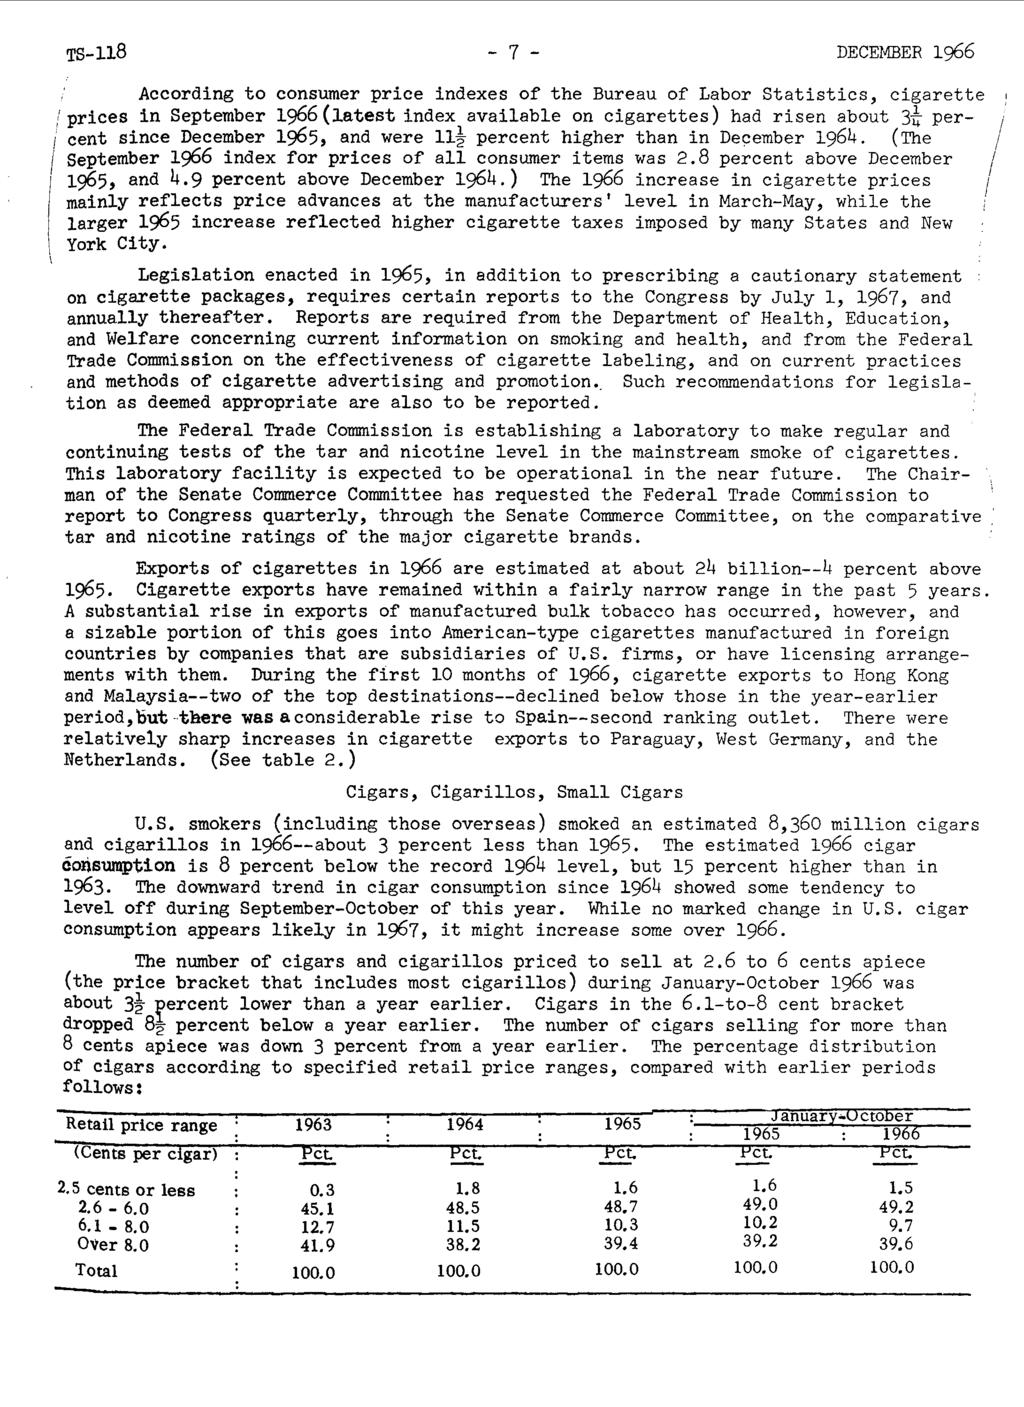 TS-118-7 - DECEMBER 1966 According to consumer price indexes of the Bureau of Labor Statistics, cigarette 1 prices in September 1966 (latest index available on cigarettes) had risen about 3-~ per.